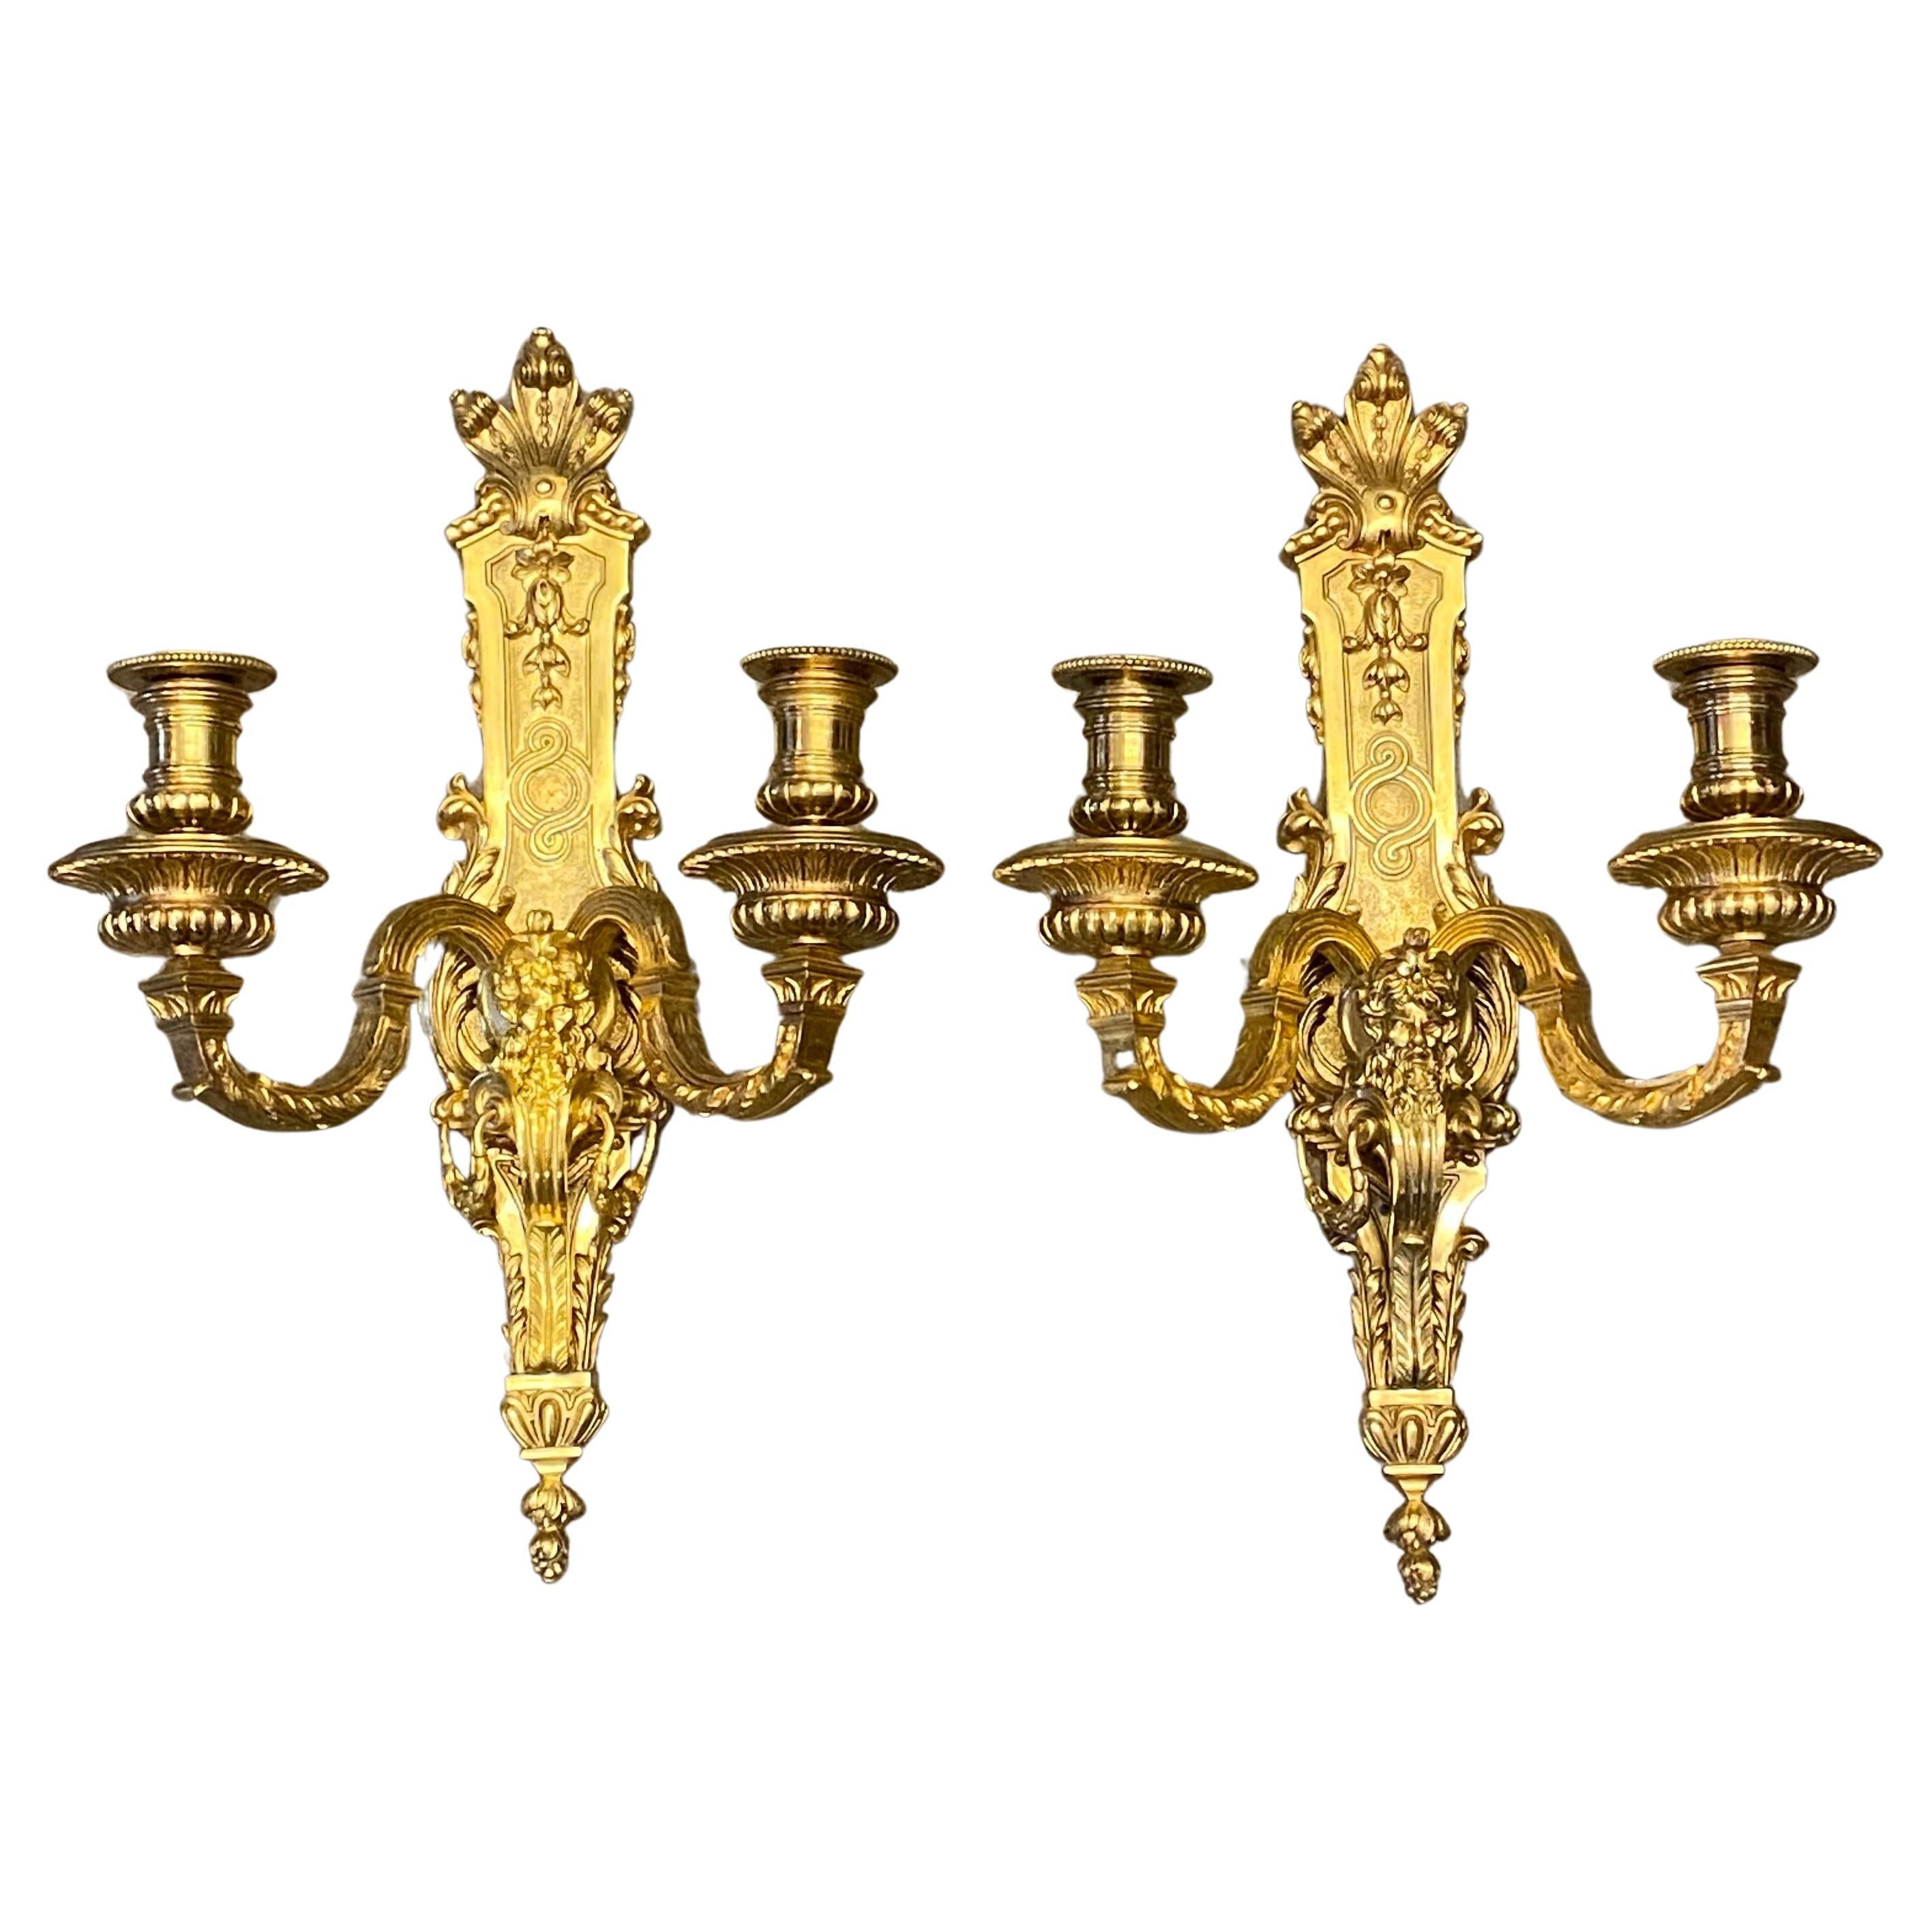 Pair Of Wall Sconces - Bronze - Mascarons - France - 19th Century